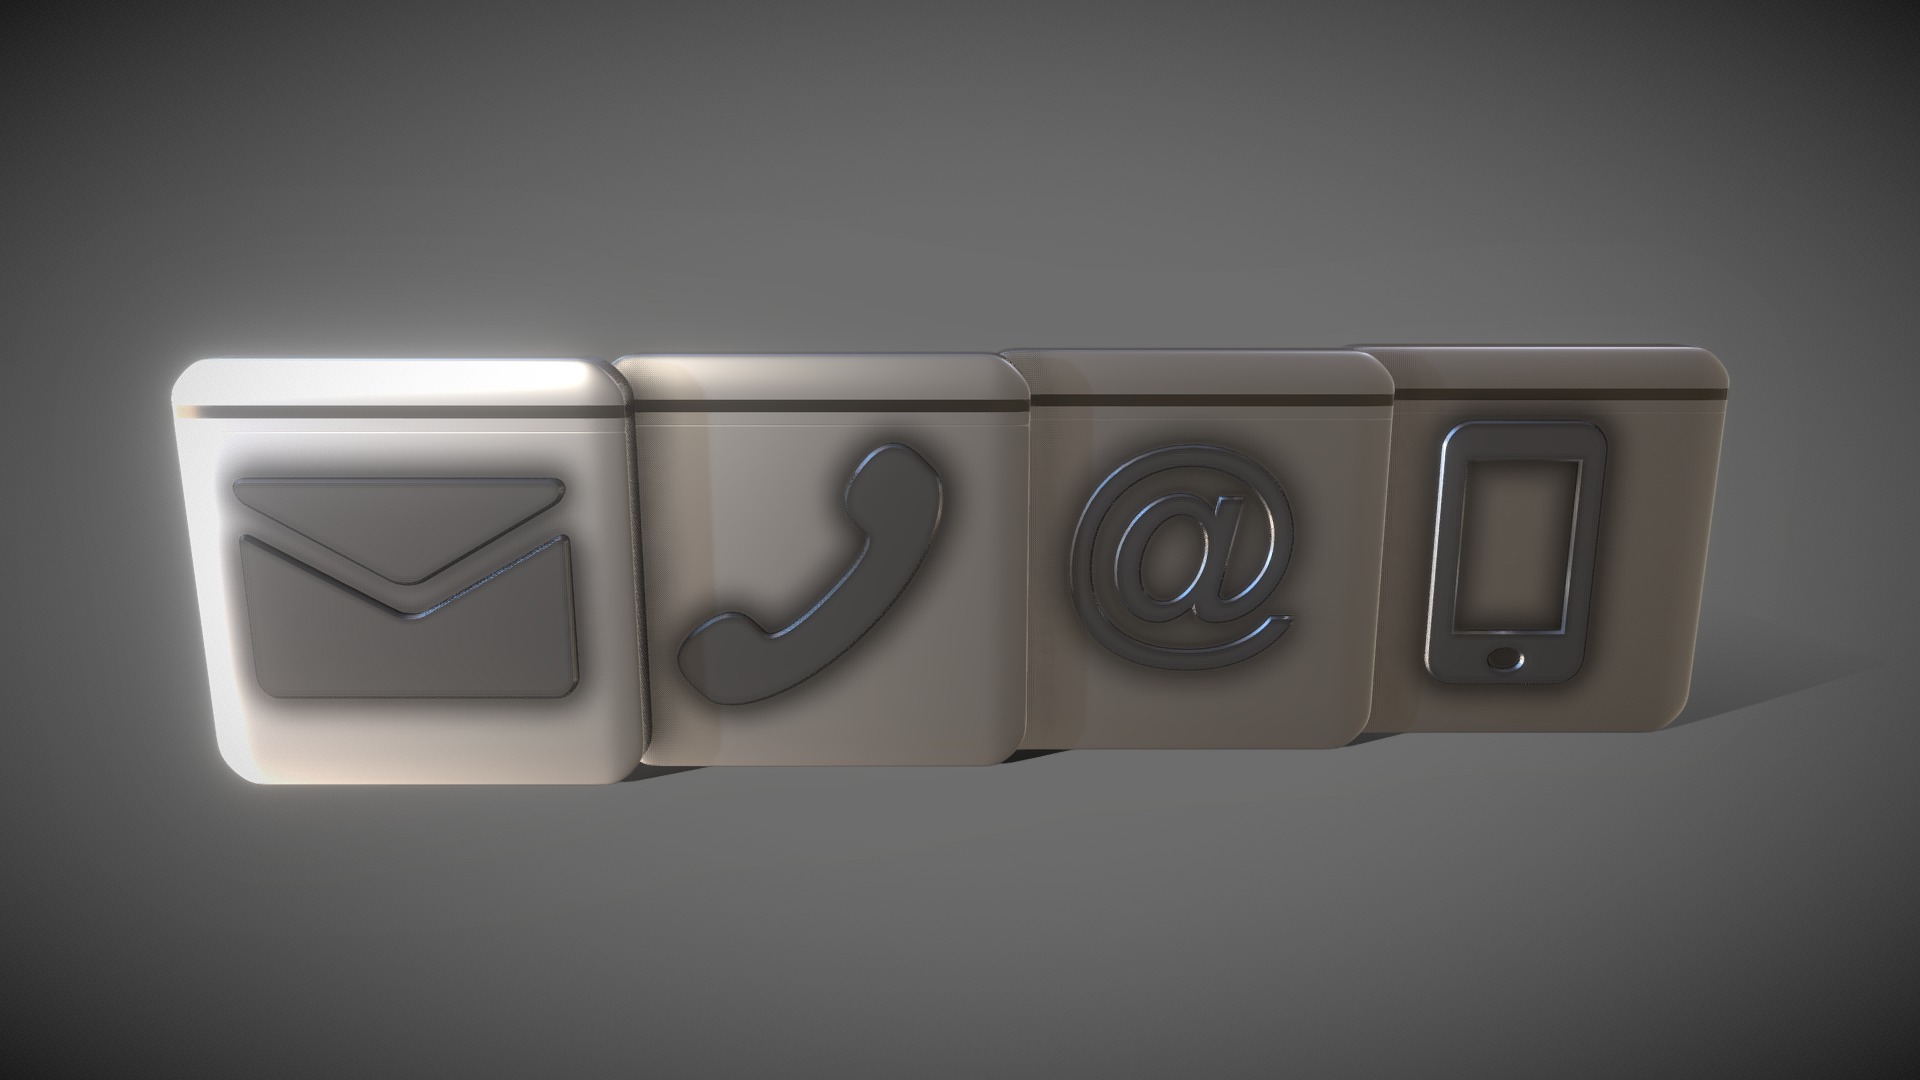 3D model Kontakt Icons - This is a 3D model of the Kontakt Icons. The 3D model is about a couple of white switches.